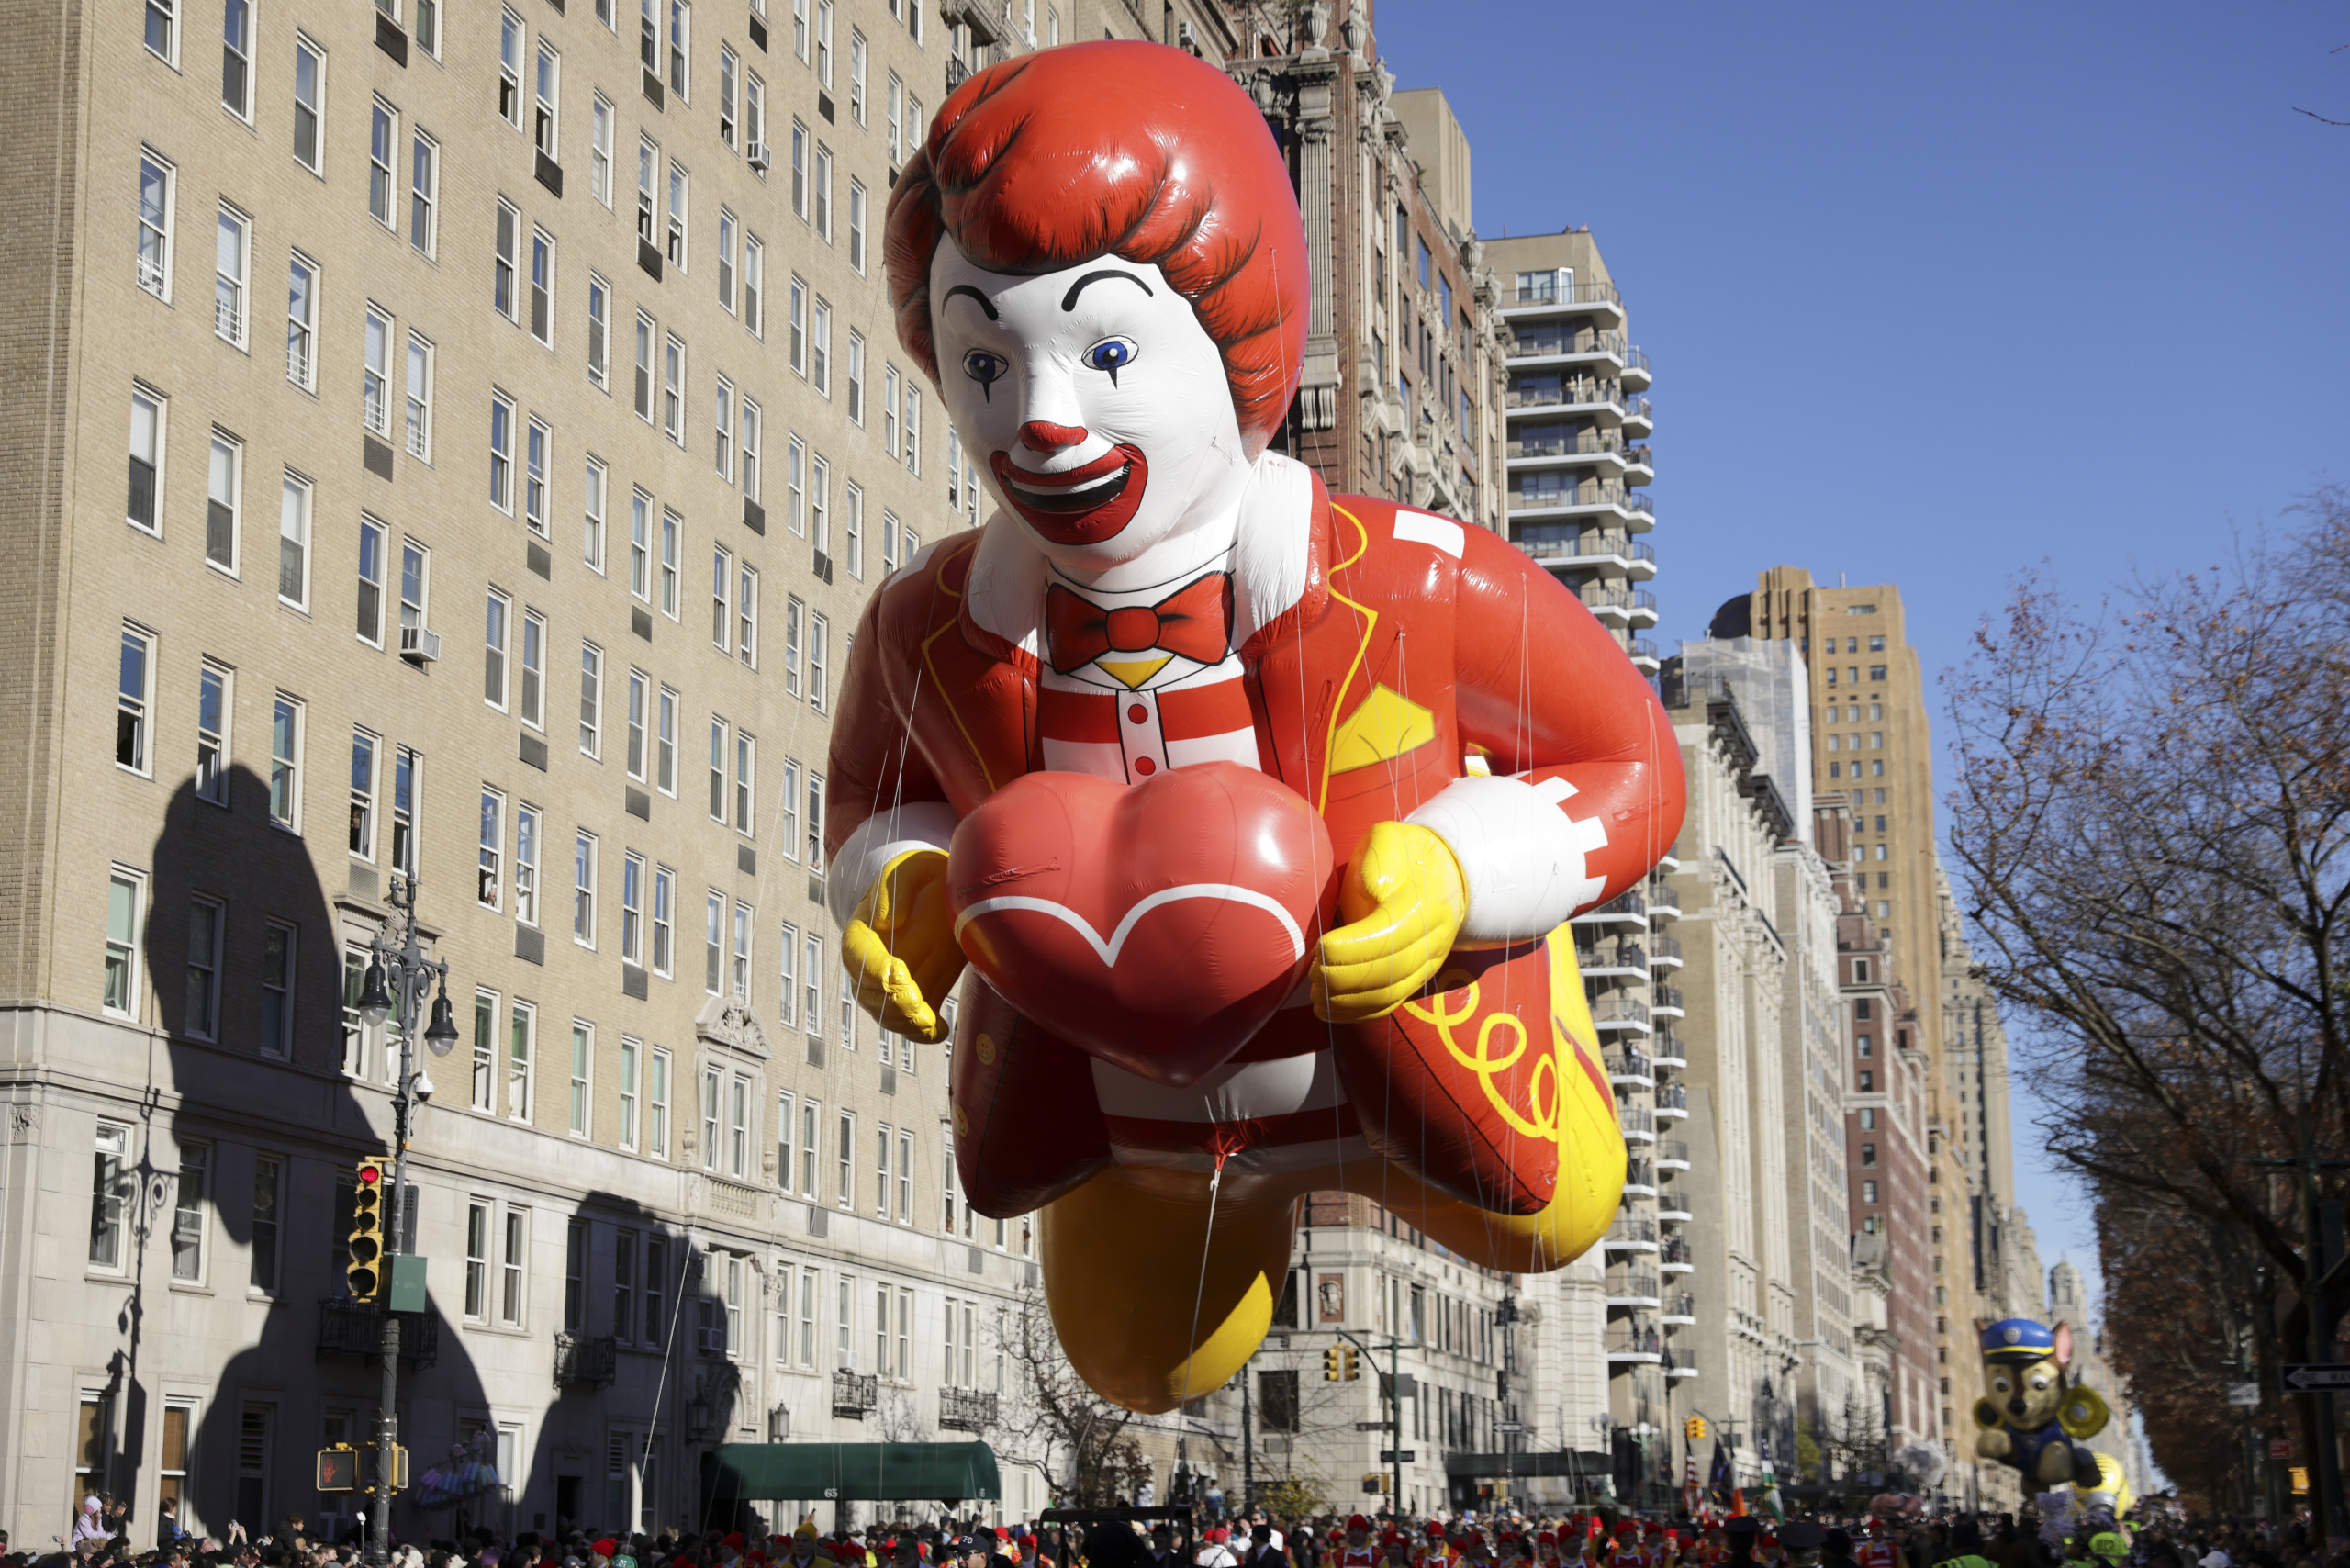 The Ronald McDonald balloon floats by along Central Park West during the Macy's Thanksgiving Day parade, Thursday, Nov. 23, 2023, in New York. (AP Photo/Jeenah Moon)